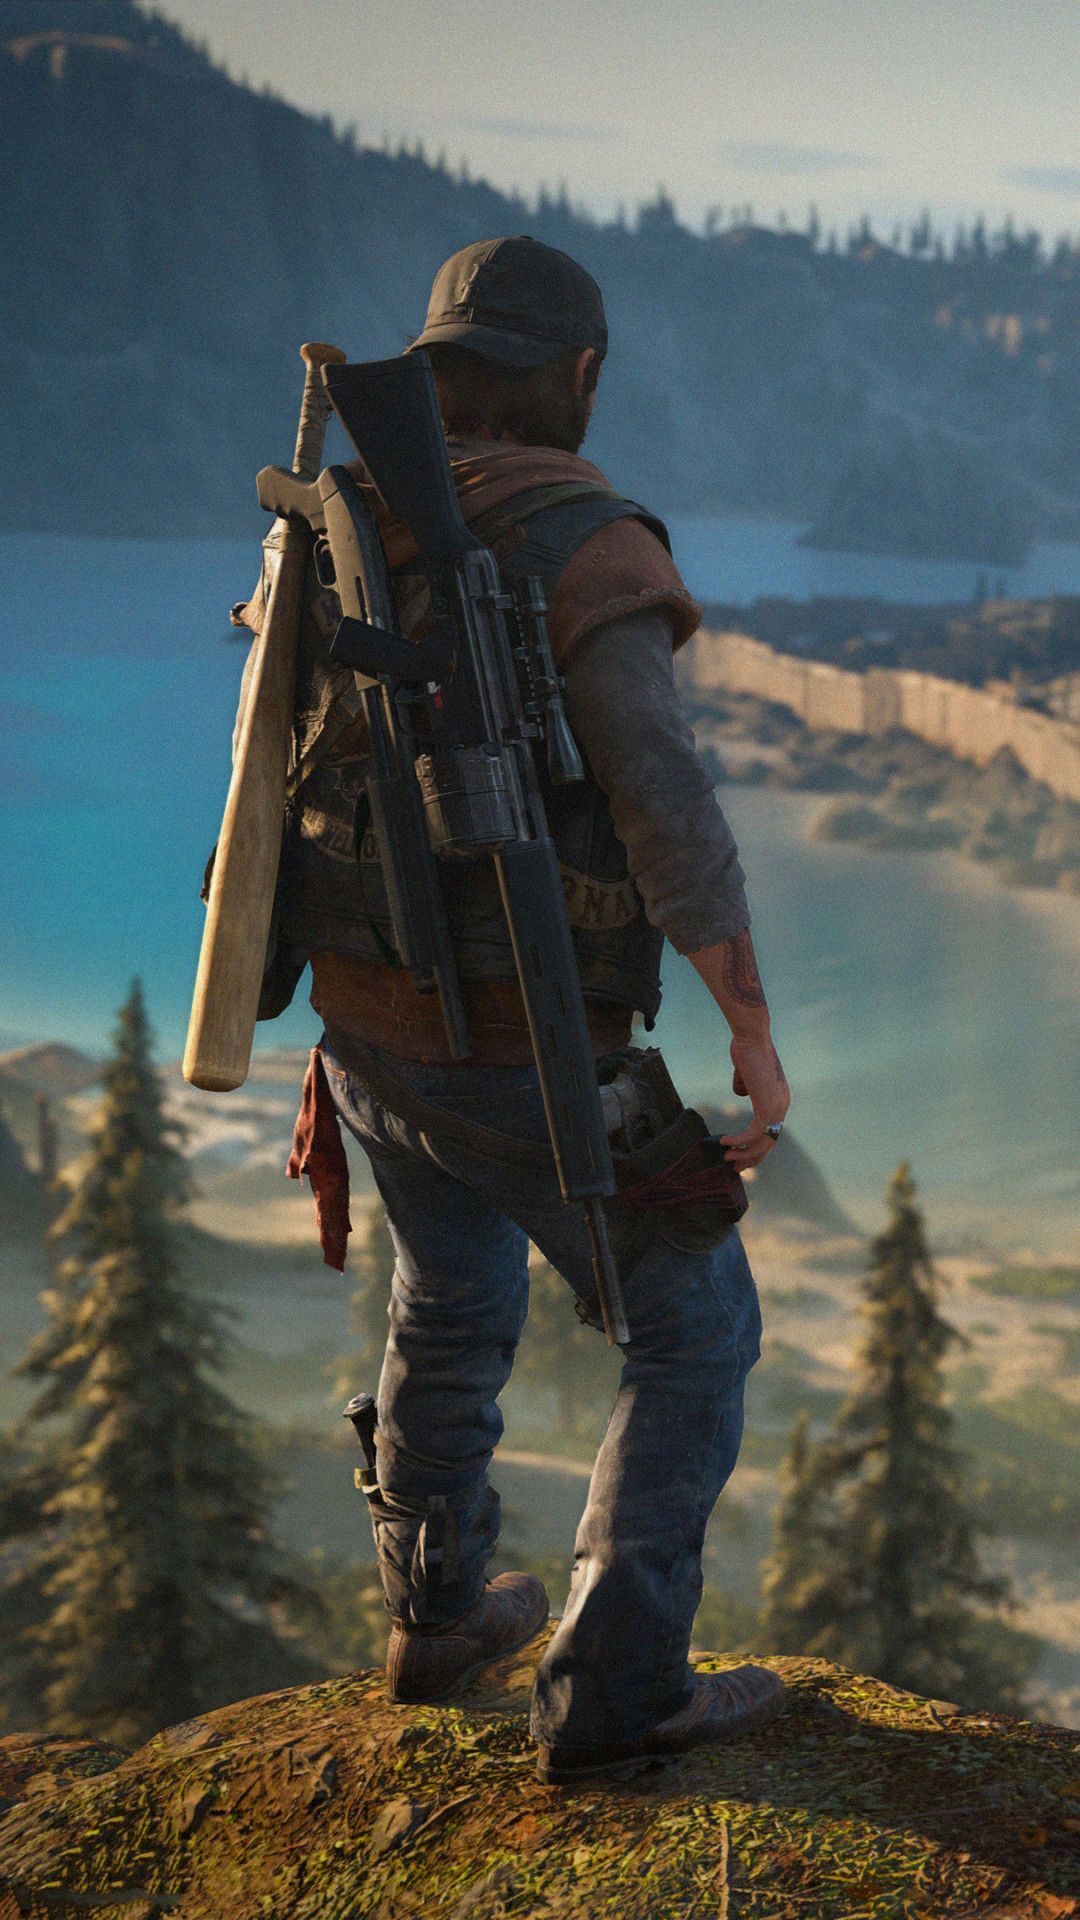 Days Gone 4k 2019 Mobile Wallpaper iPhone, Android, Samsung